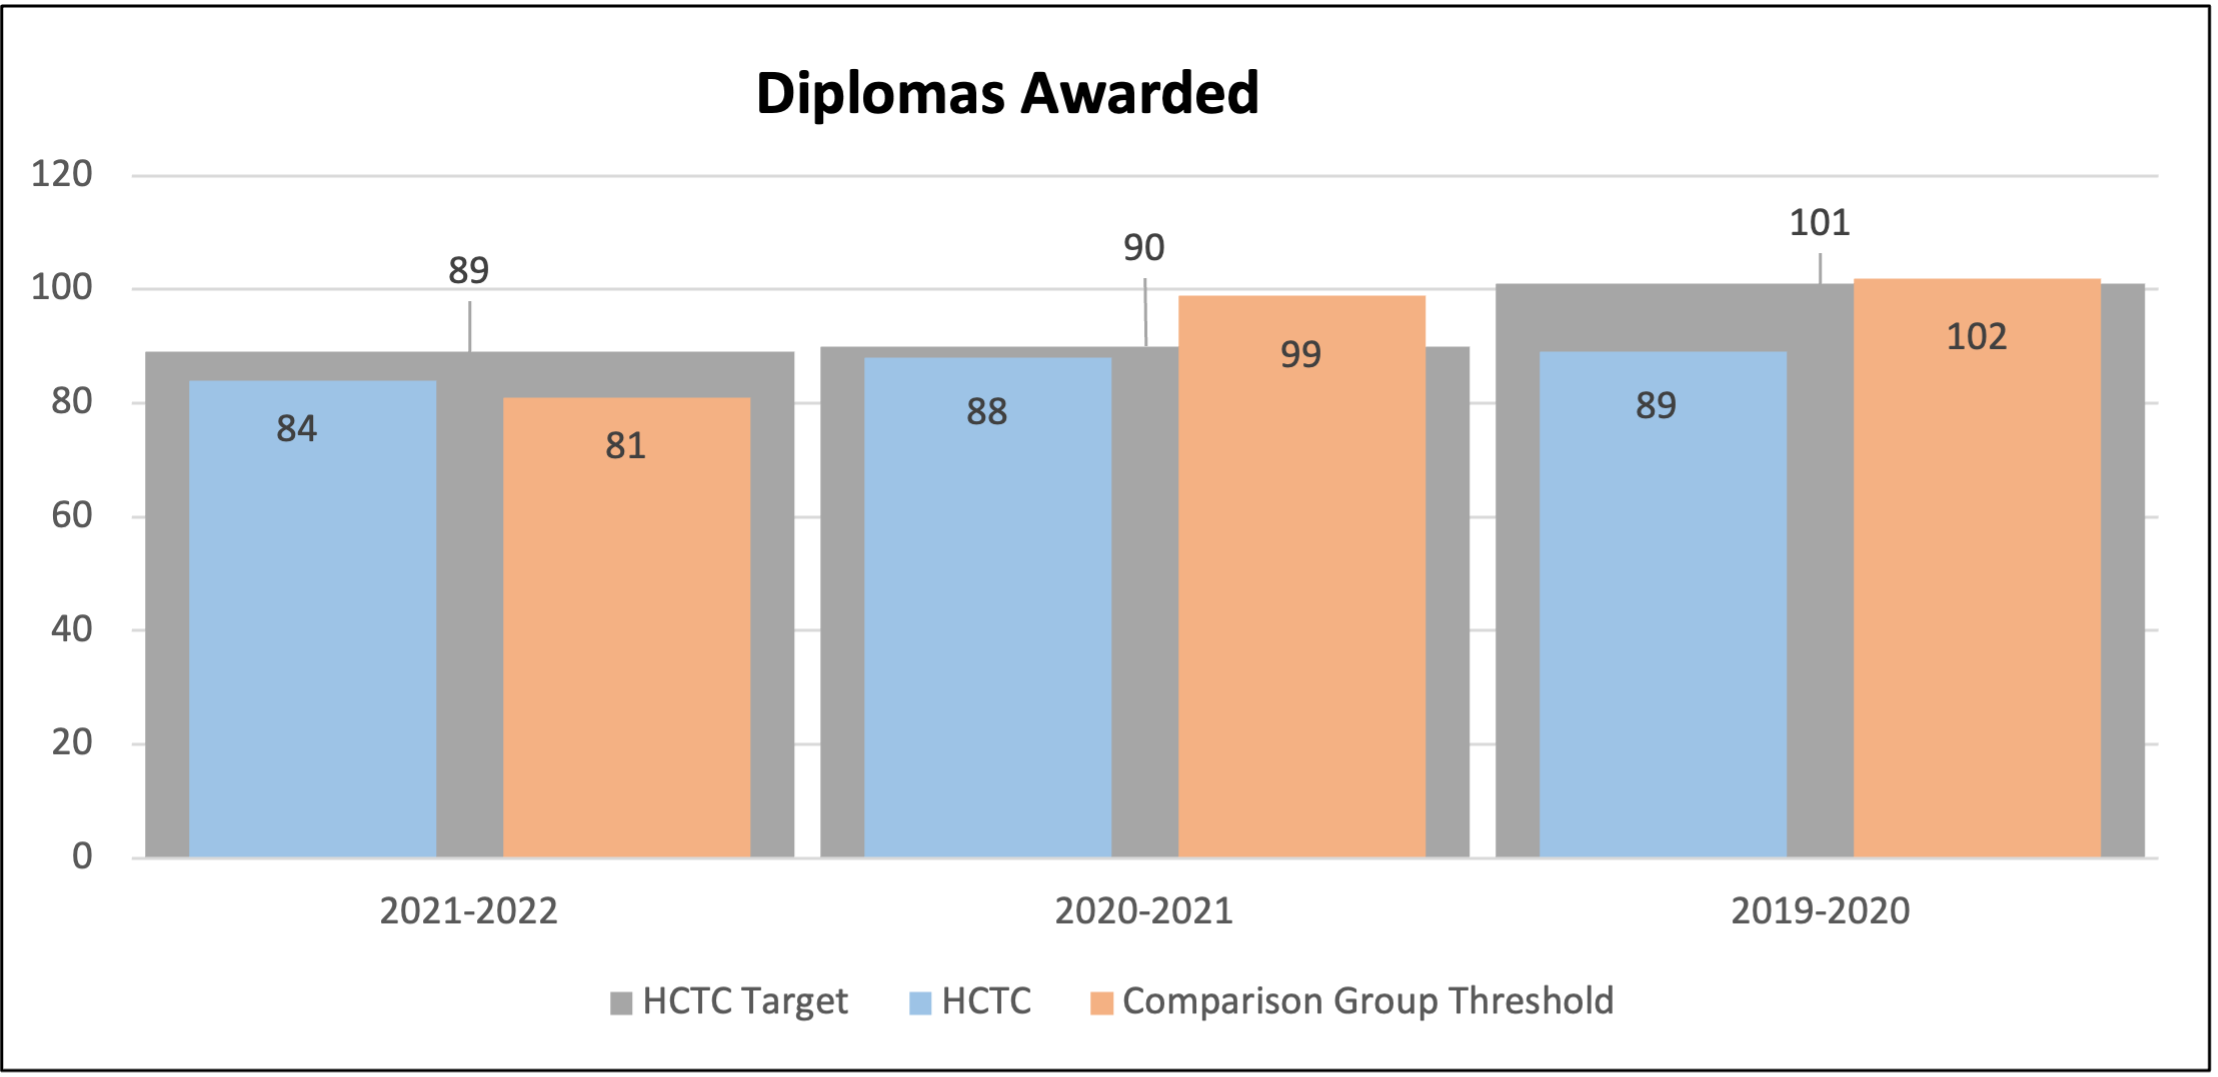 Diplomas Awarded: Measured by the total number of diplomas awarded for the academic year.  HCTC's threshold is to meet or exceed the median total diplomas awarded for its comparison group.